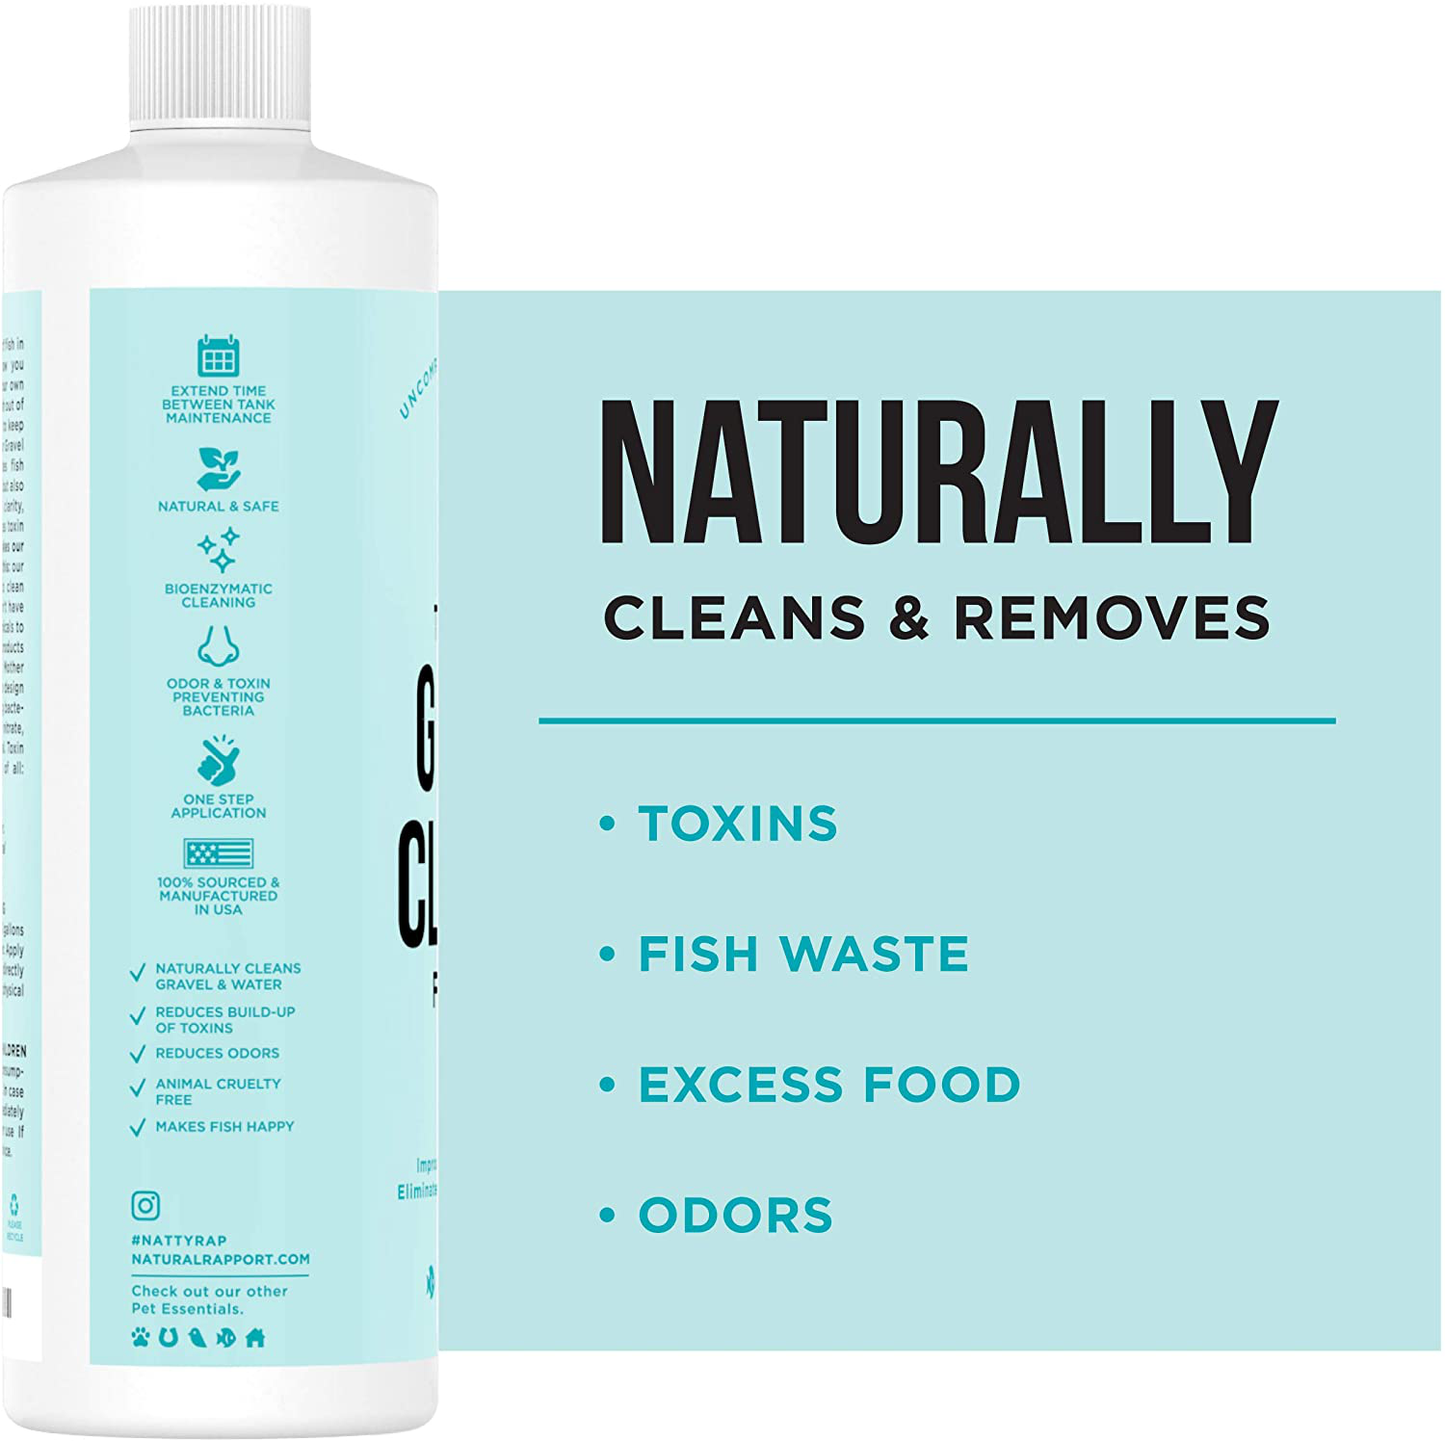 Natural Rapport Aquarium Gravel Cleaner - the Only Gravel Cleaner Fish Need - Professional Aquarium Gravel Cleaner to Naturally Maintain a Healthier Tank, Reducing Fish Waste and Toxins (16 Fl Oz) Animals & Pet Supplies > Pet Supplies > Fish Supplies > Aquarium Cleaning Supplies Natural Rapport   